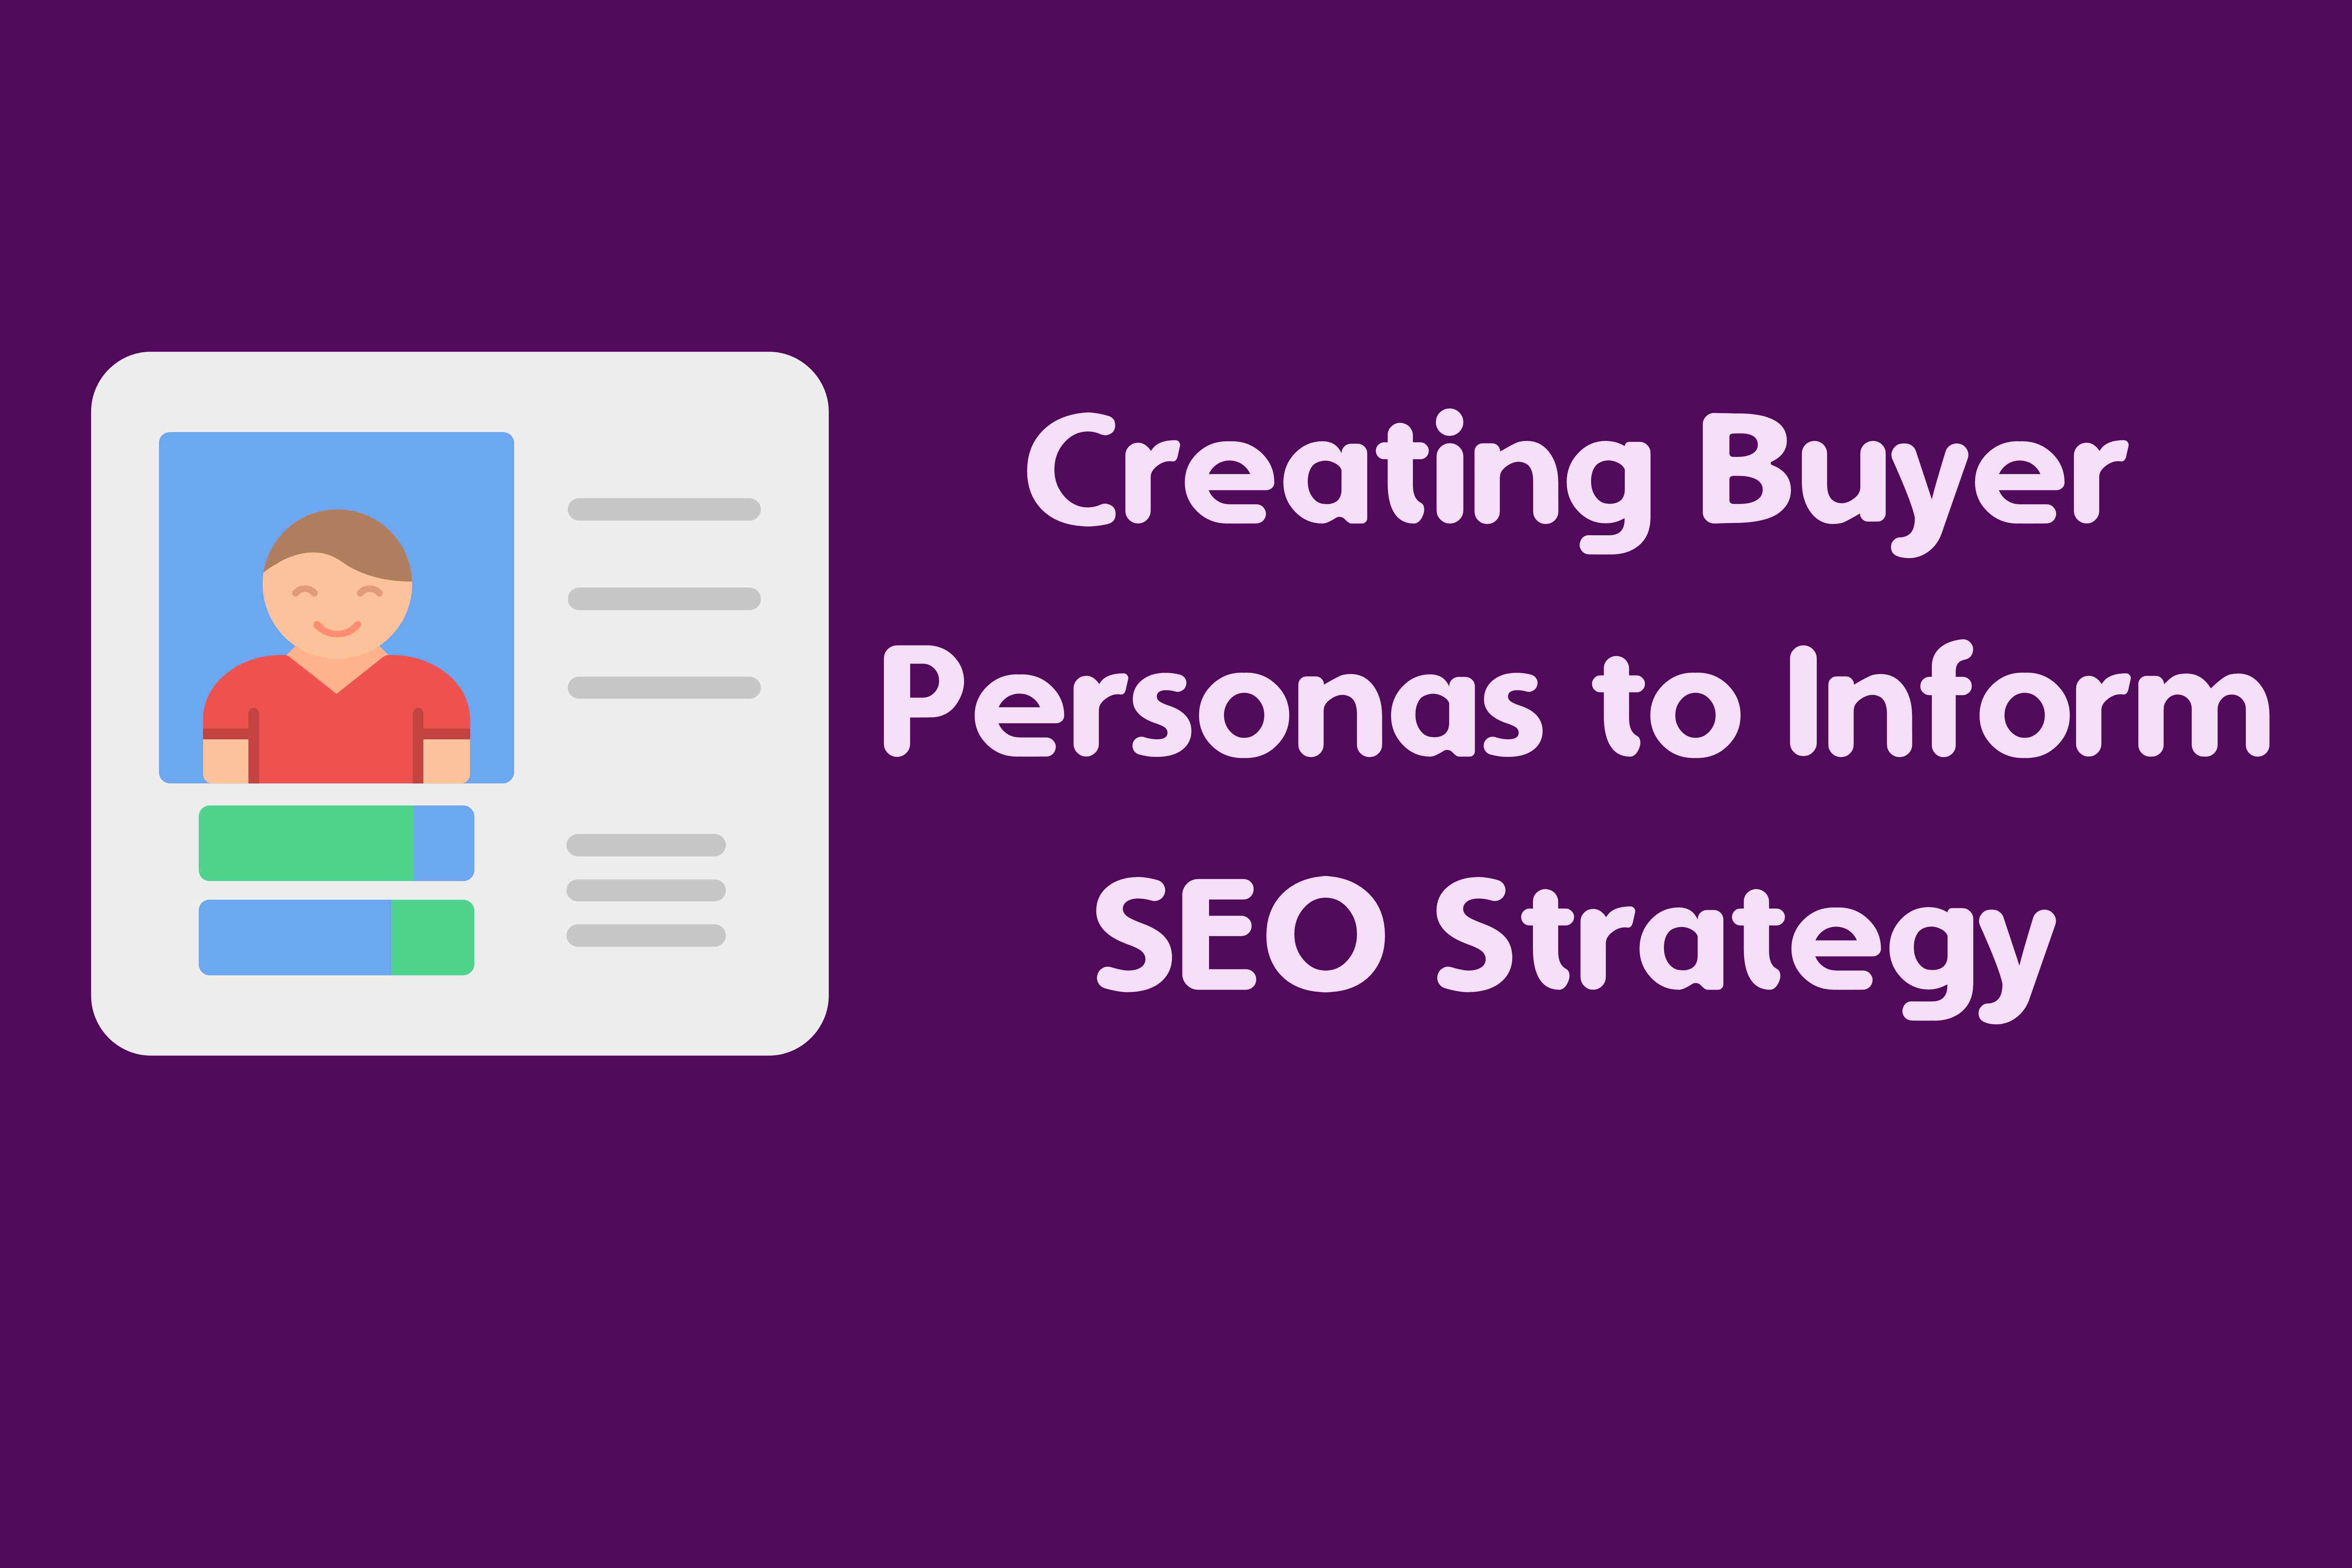 Creating Buyer Personas to Inform SEO Strategy